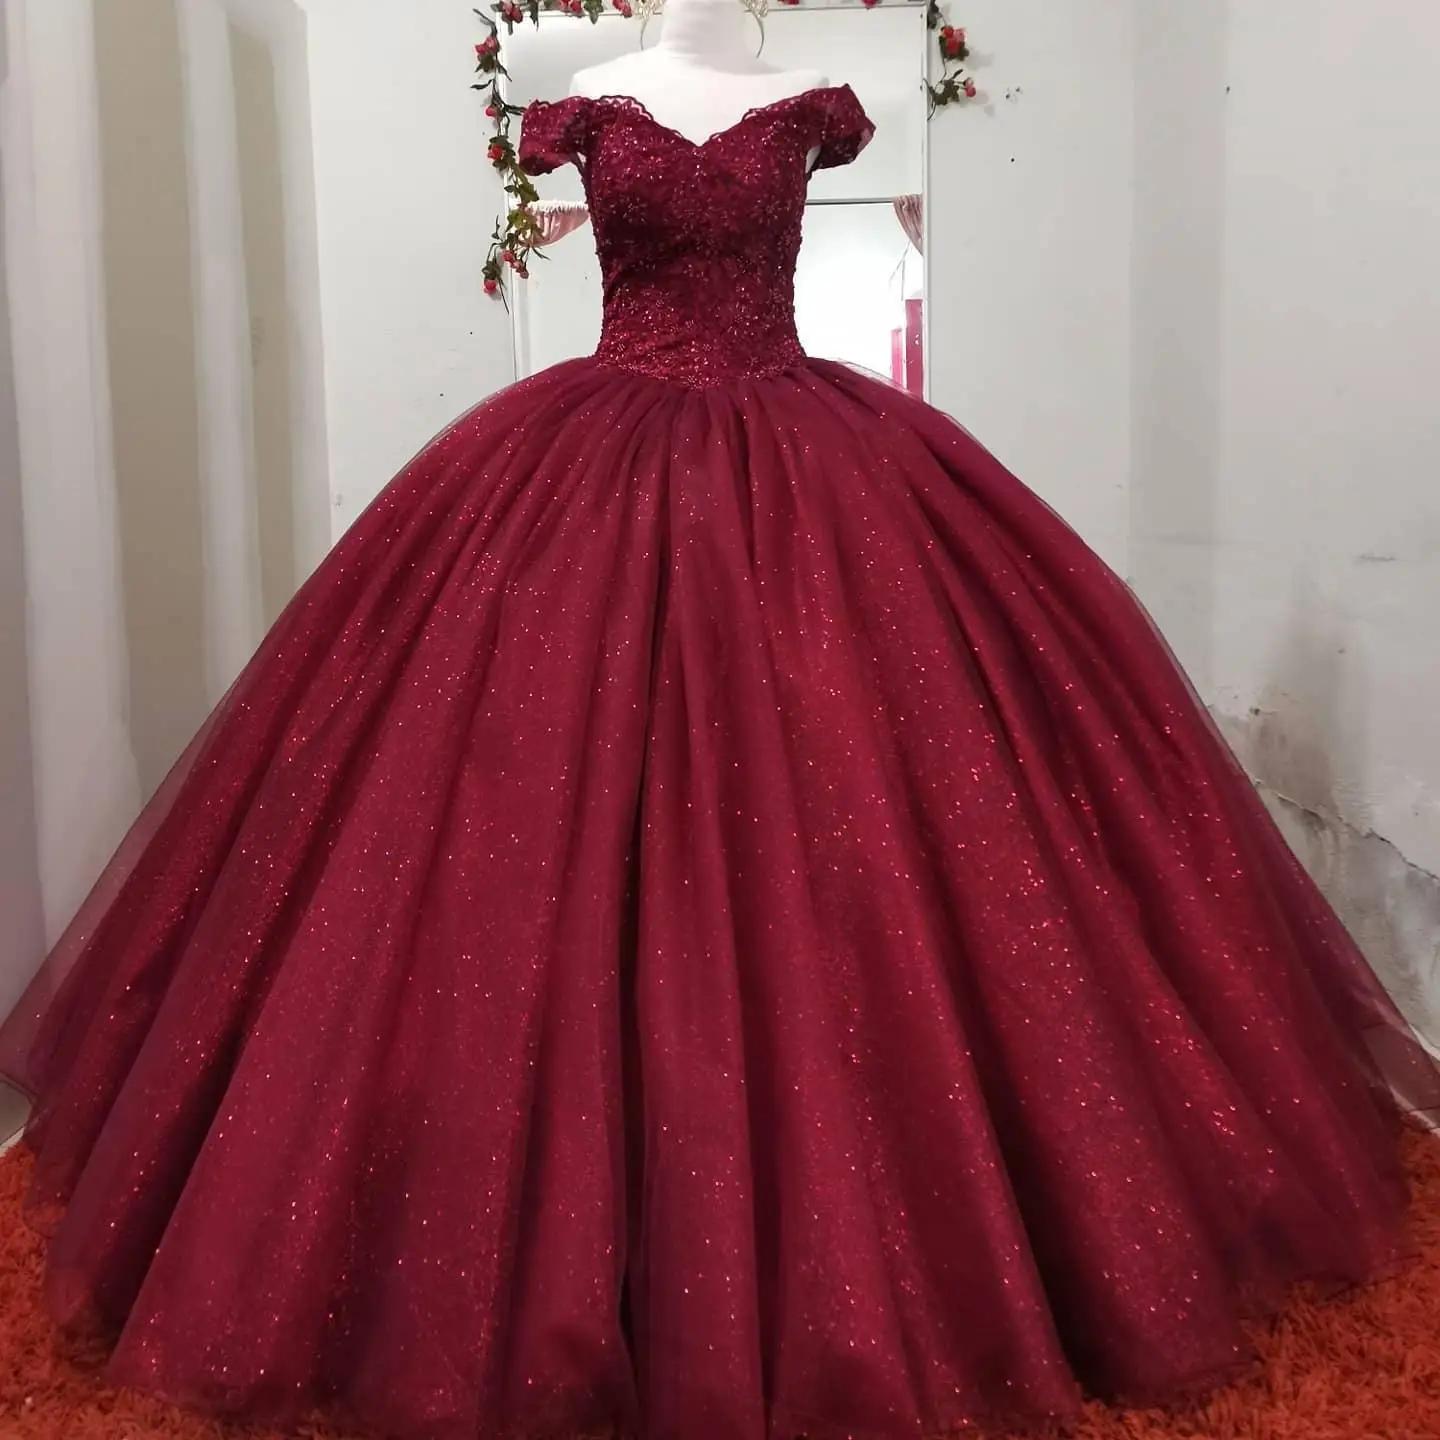 

ANGELSBRIDEP Burgundy Quinceanera Dresses Lace Embroidery Off The Shoulder Formal Sweet 16 Dress Vestido De 15 Anos Ball Gowns